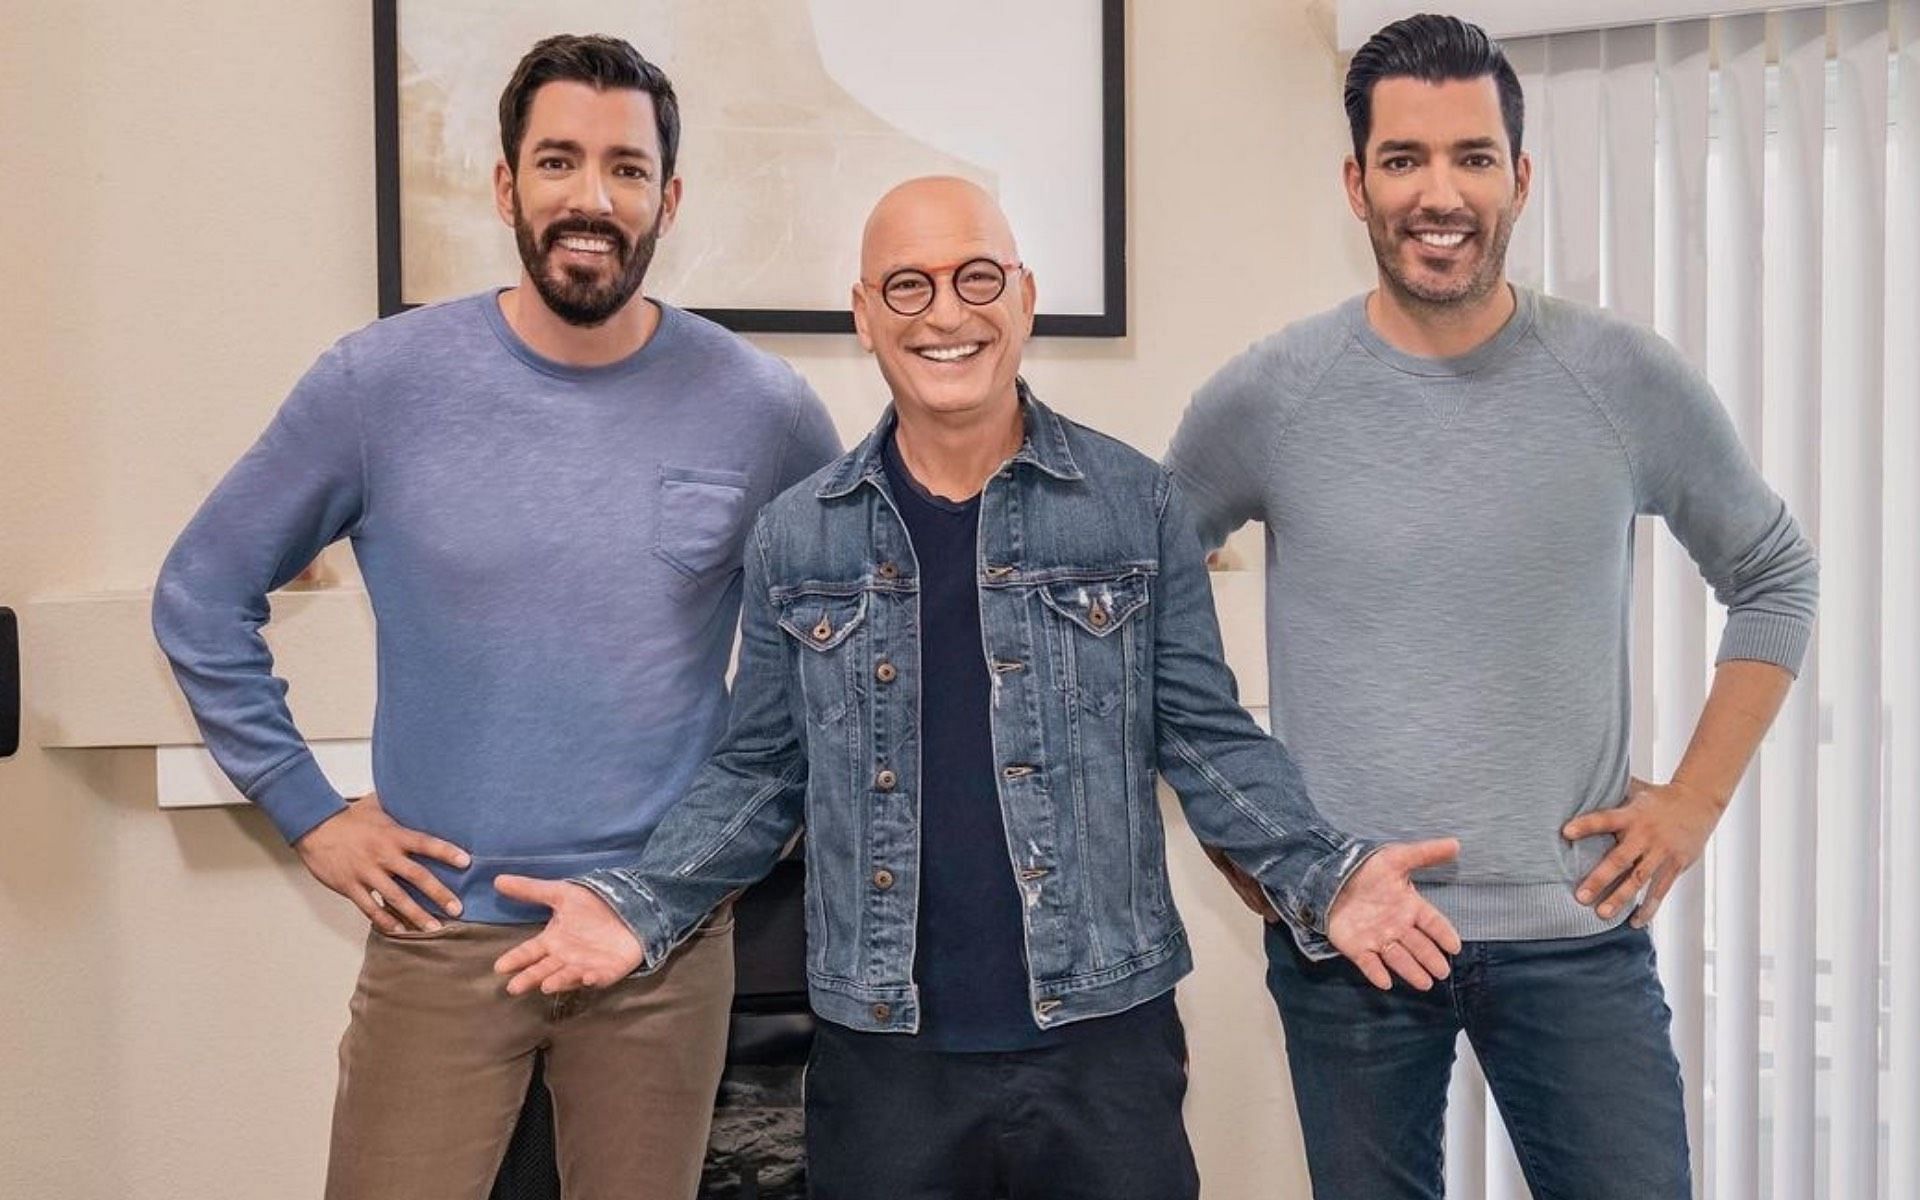 Episode 2 of Celebrity IOU Season 4 to air on May 25 (Image via propertybrothers/Instagram)